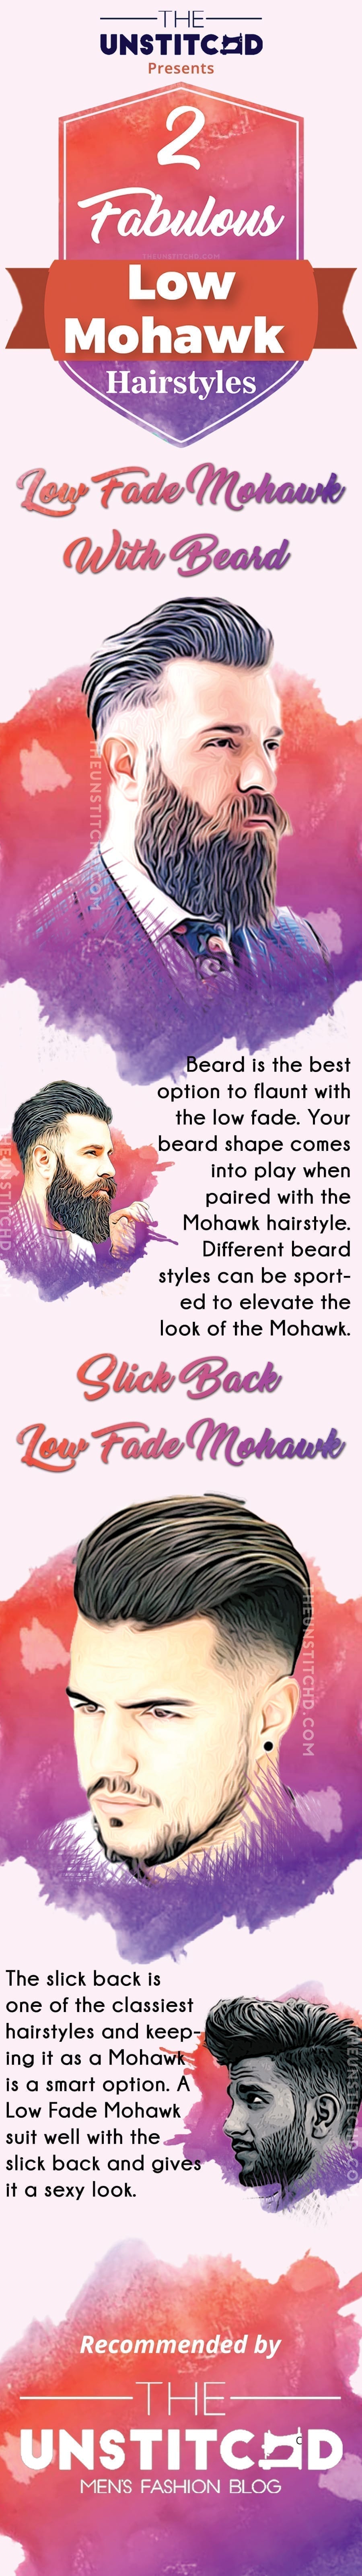 low-mohawk-hairstyle-info